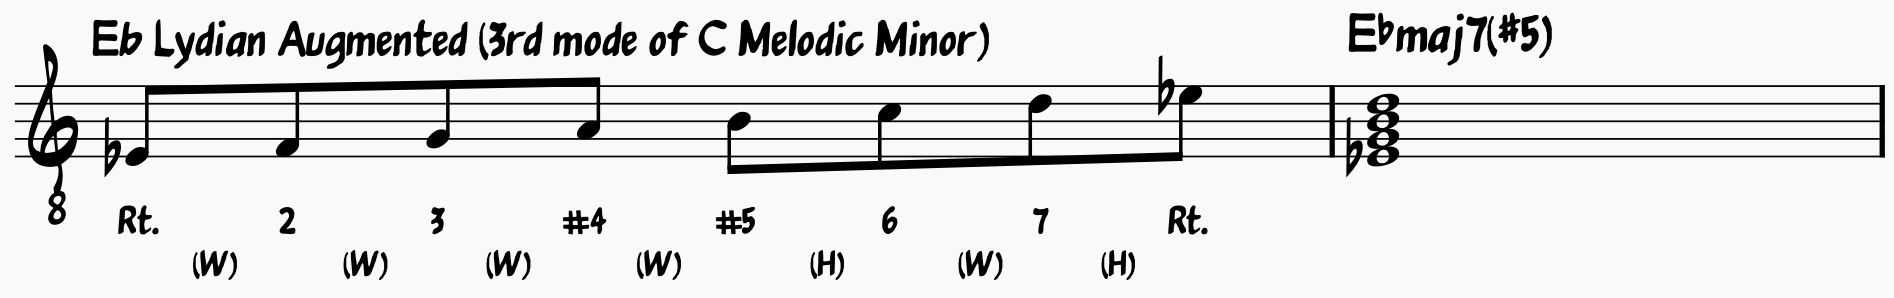 Eb Lydian Augmented; 3rd Mode of C Melodic Minor